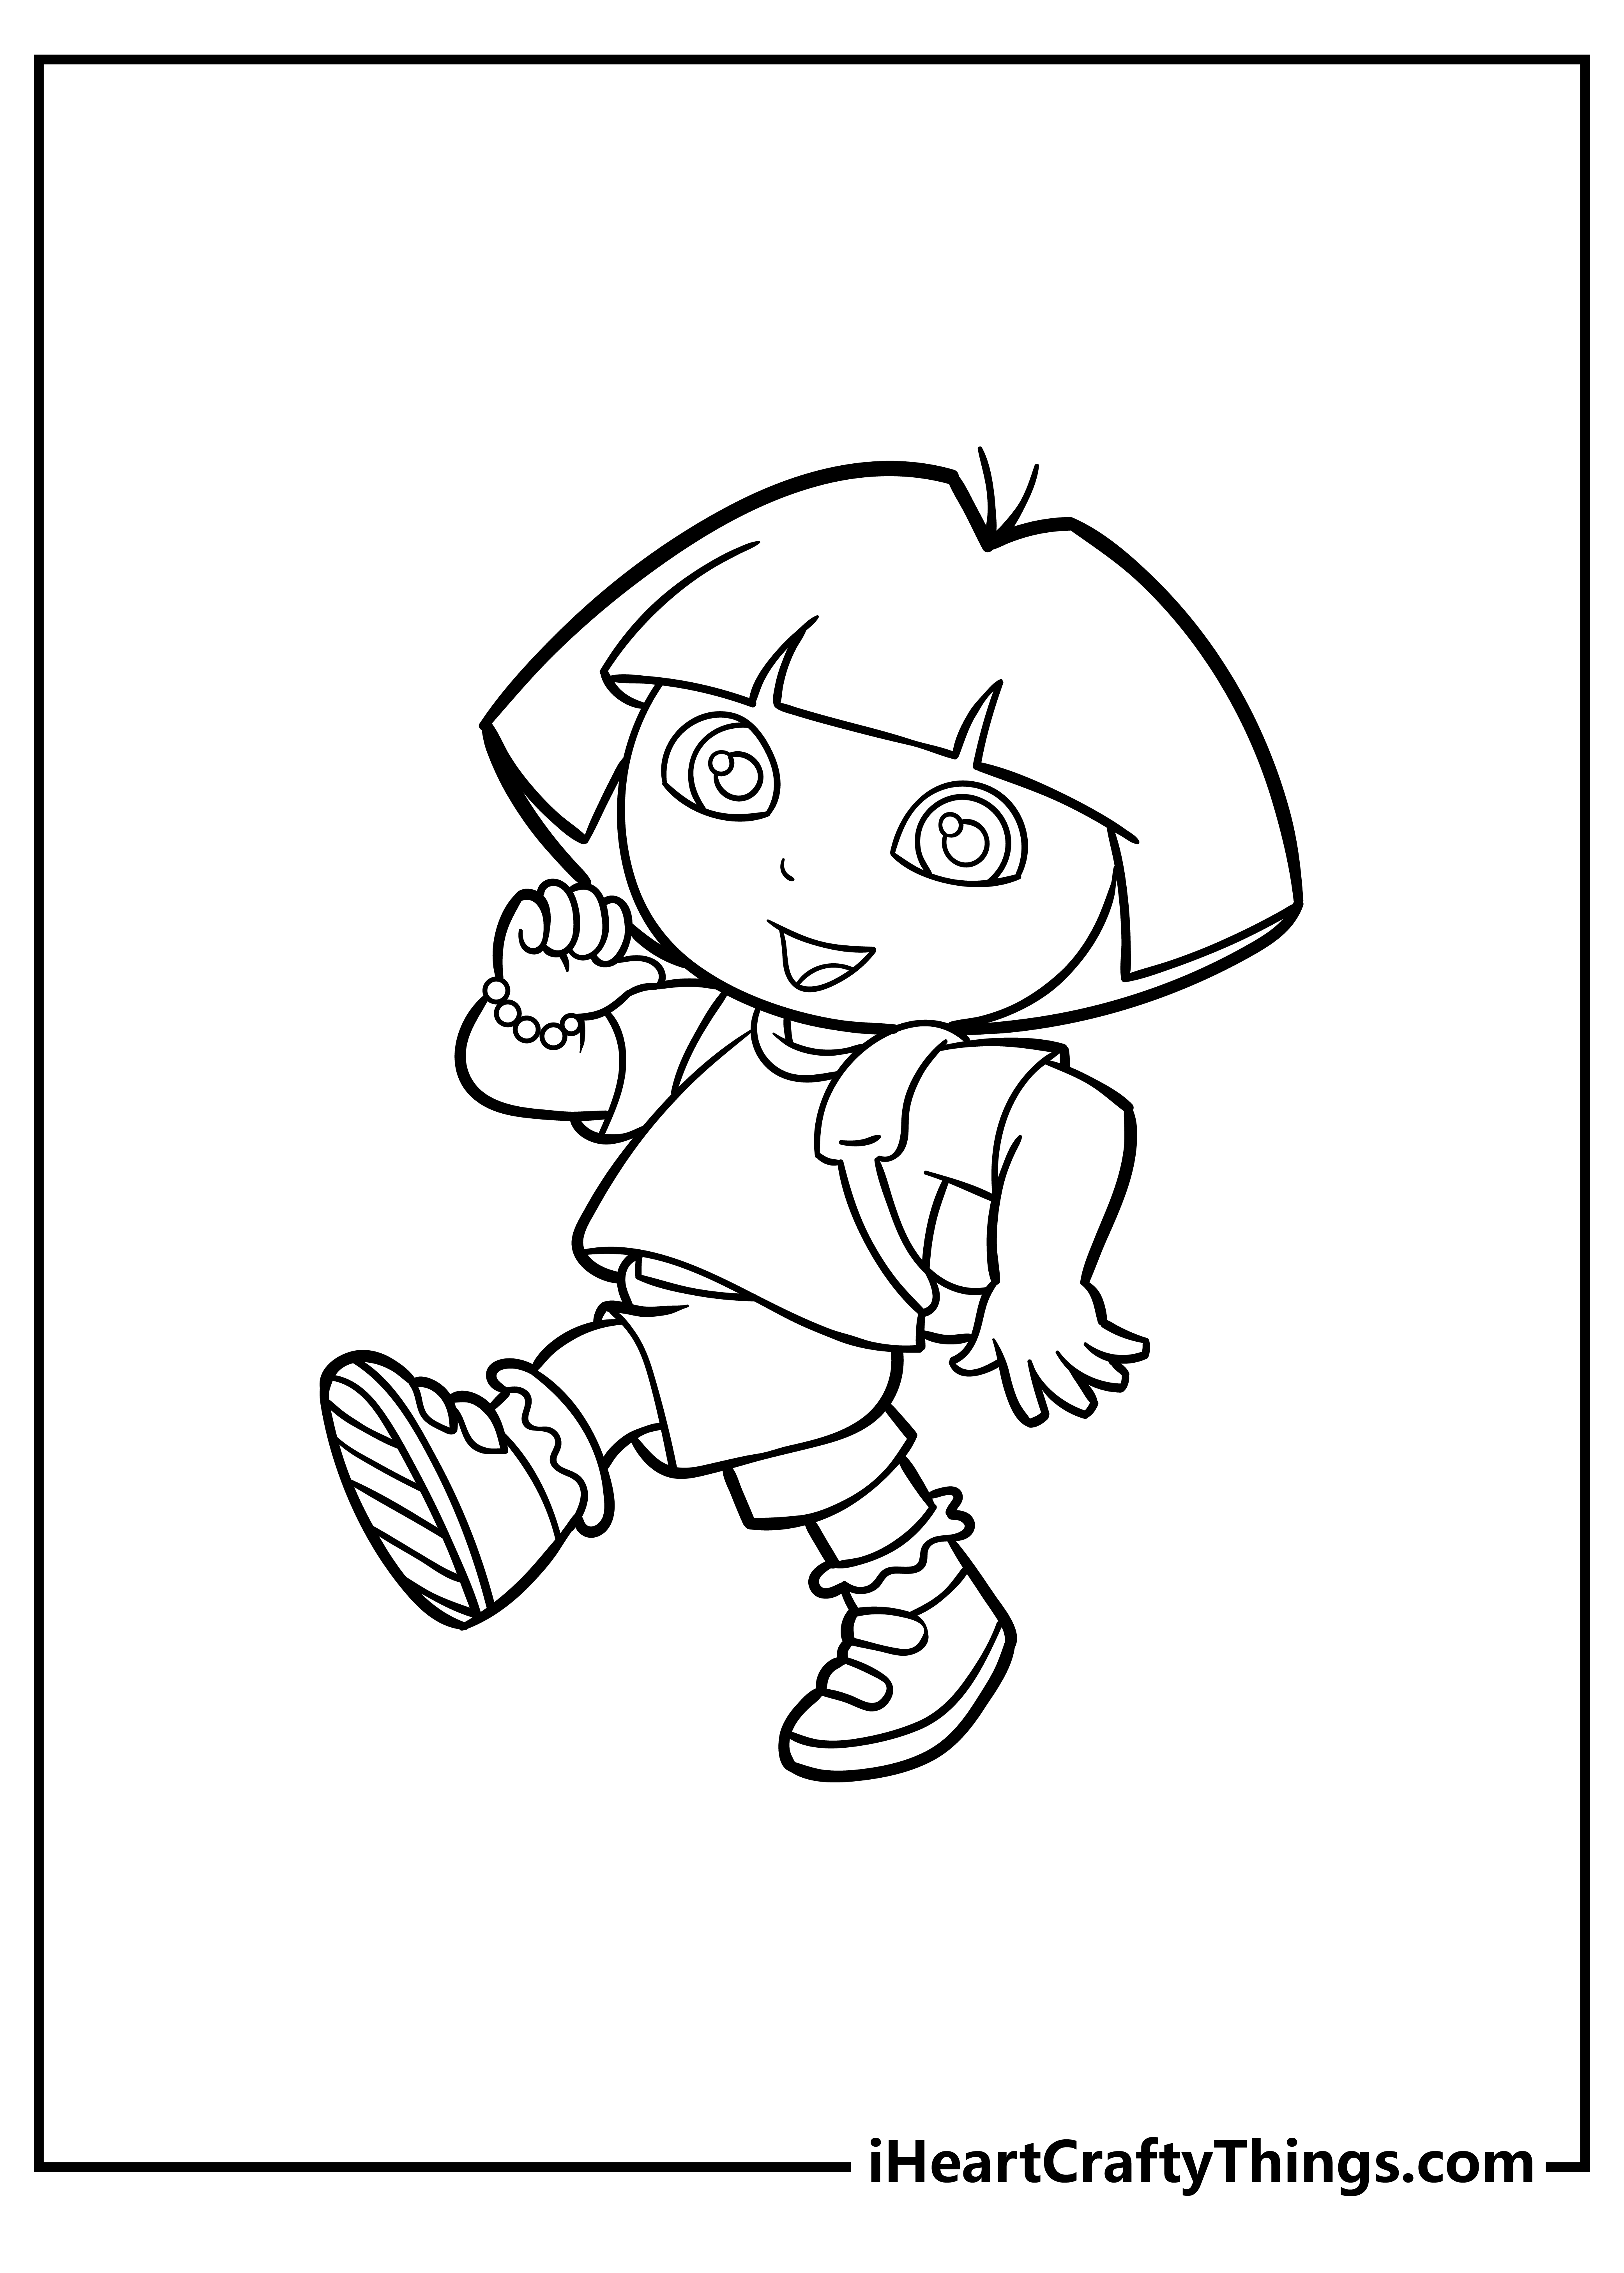 Dora Coloring Pages for adults free printable